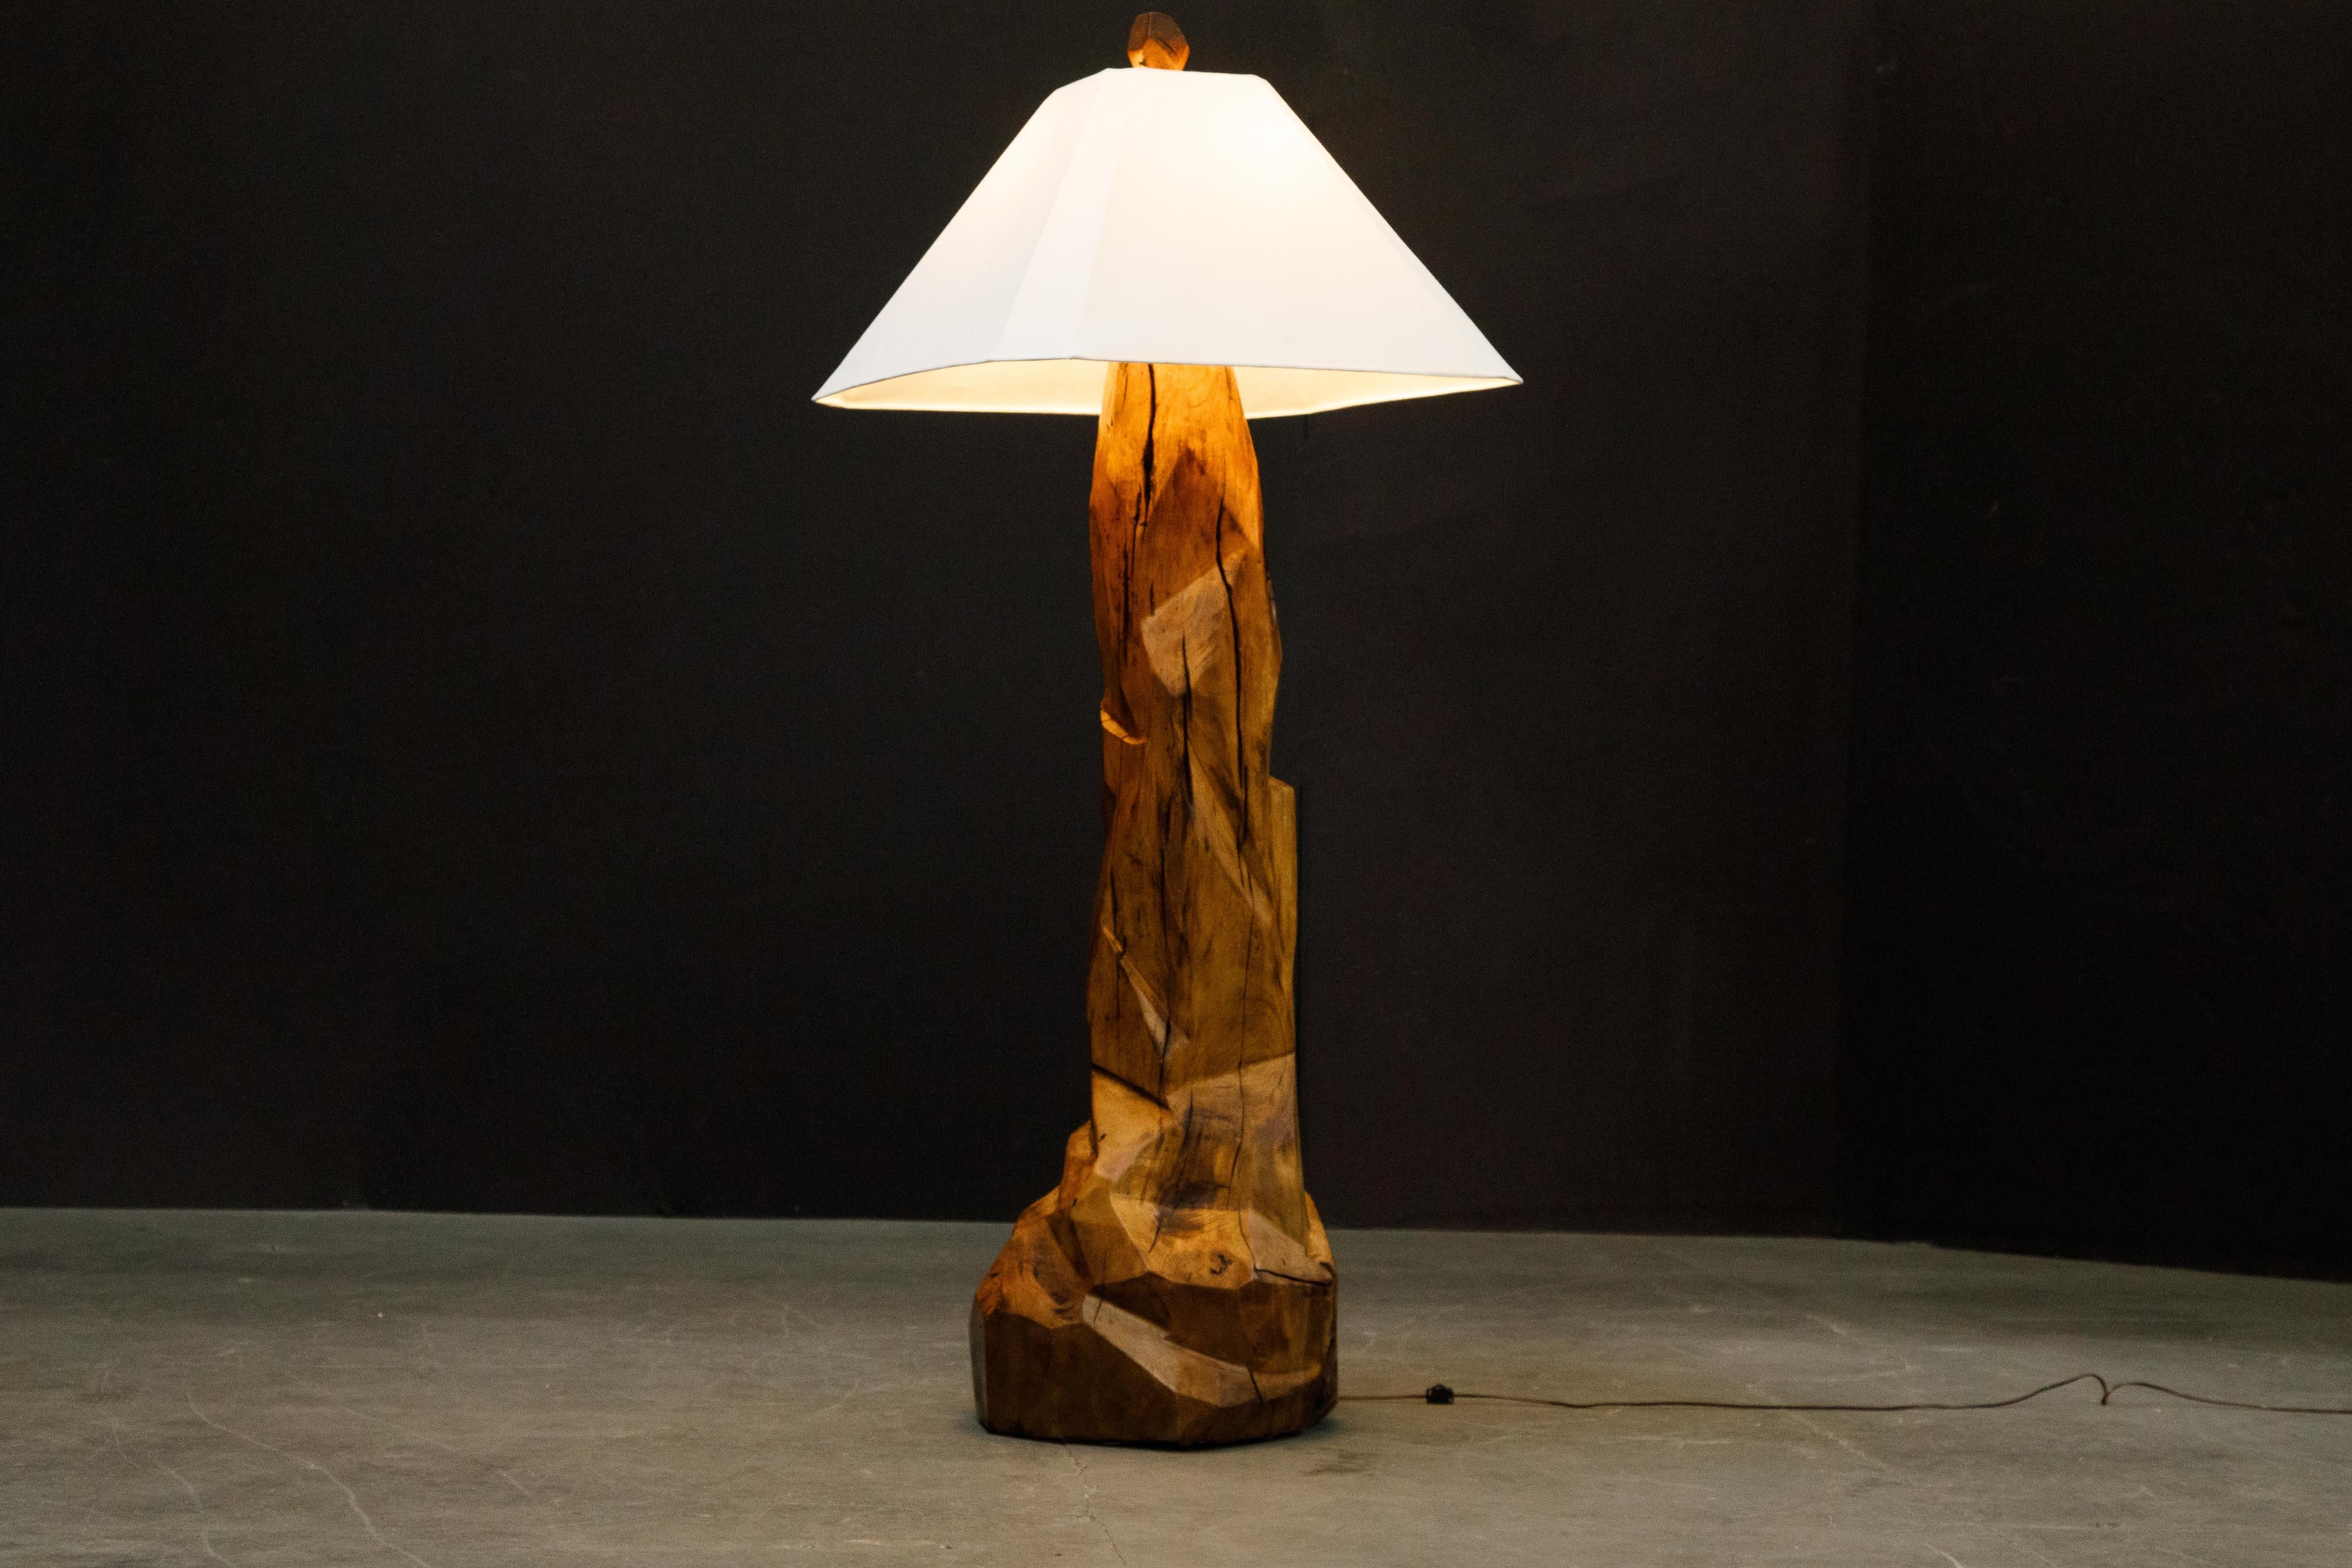 This monumental 1970s California Craftsman sculptural carved wood floor lamp is exquisitely crafted from a large slab of hardwood and polished for a smooth finish. The finial is carved from the same wood. For size comparison the lamp is shown in the